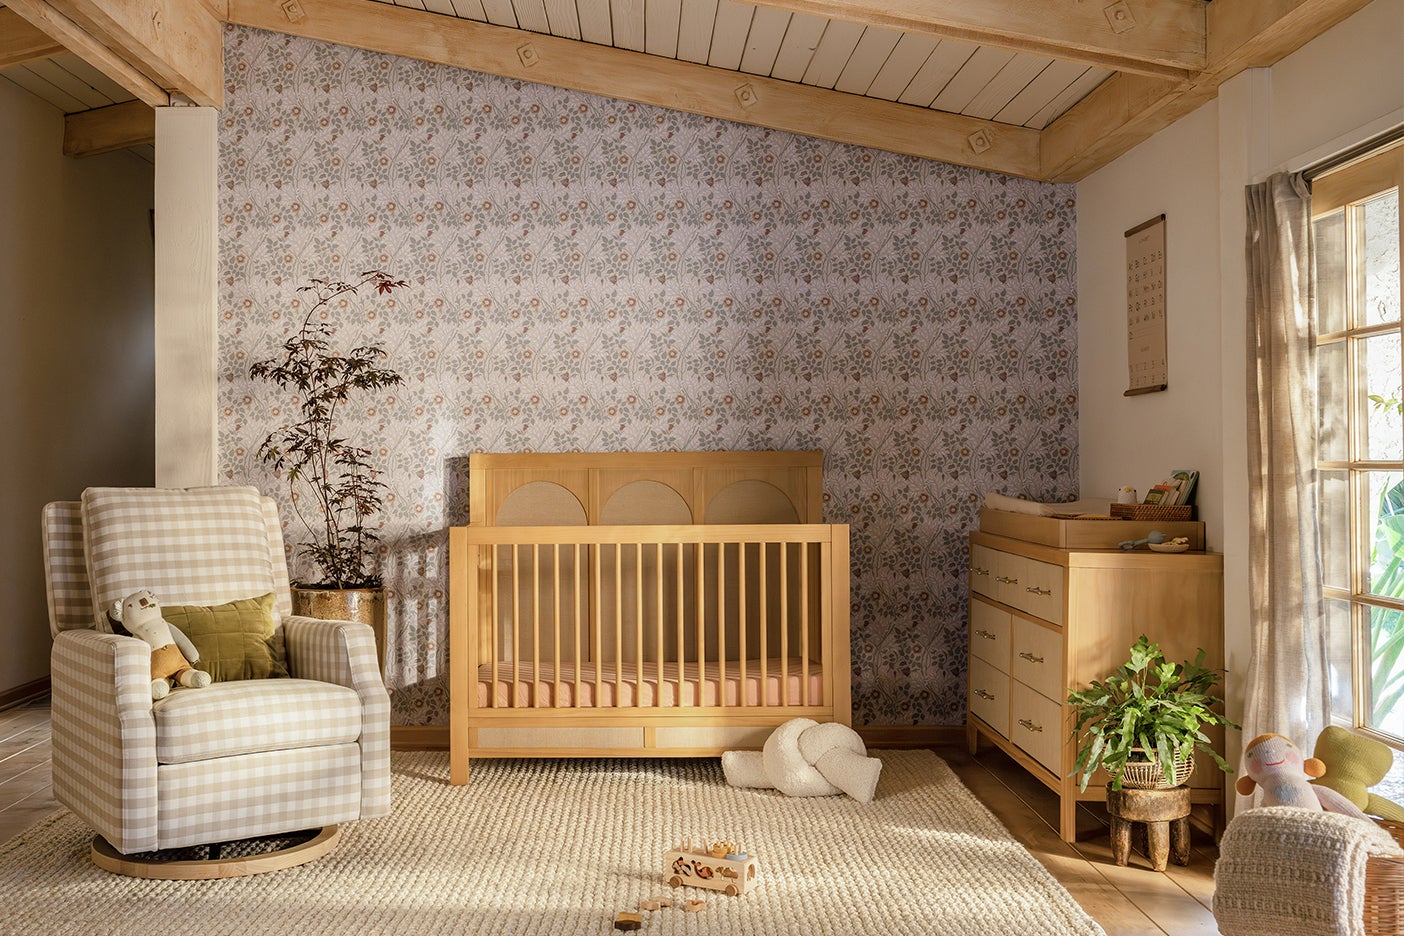 We Found the Stylish Convertible Crib That New Parents Will Love for Years to Come